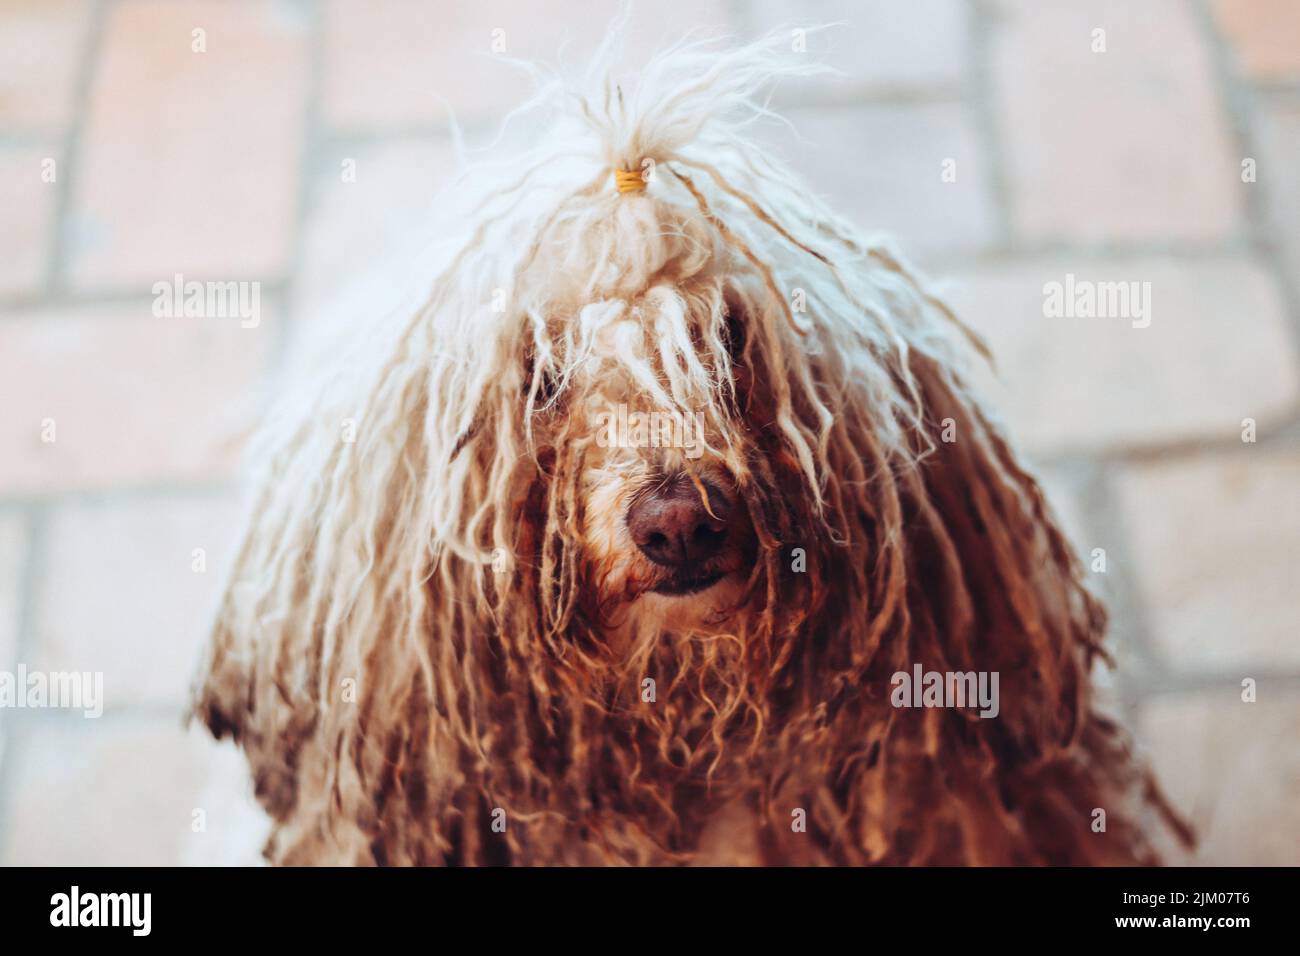 A Hungarian Puli dog with an interesting hairstyle. Stock Photo